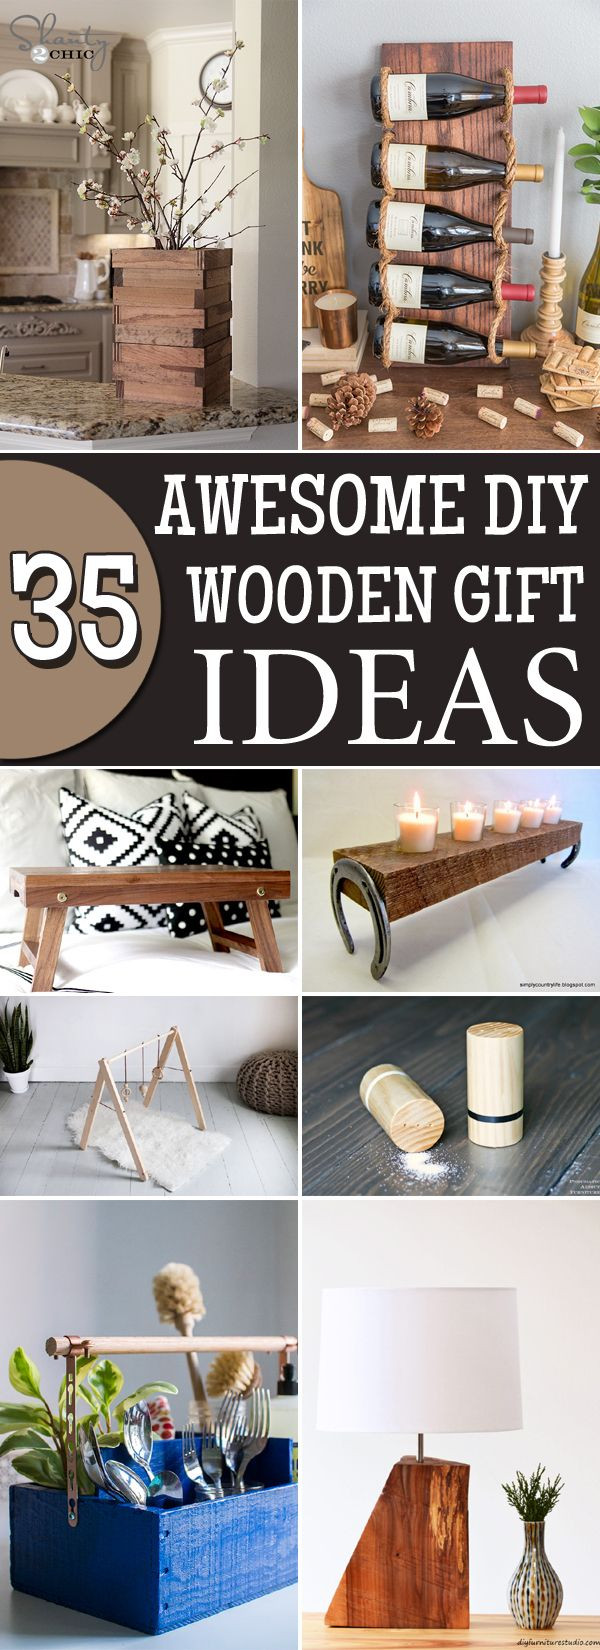 DIY Woodworking Christmas Gifts
 35 Simple Gifts You Can Make From Wood